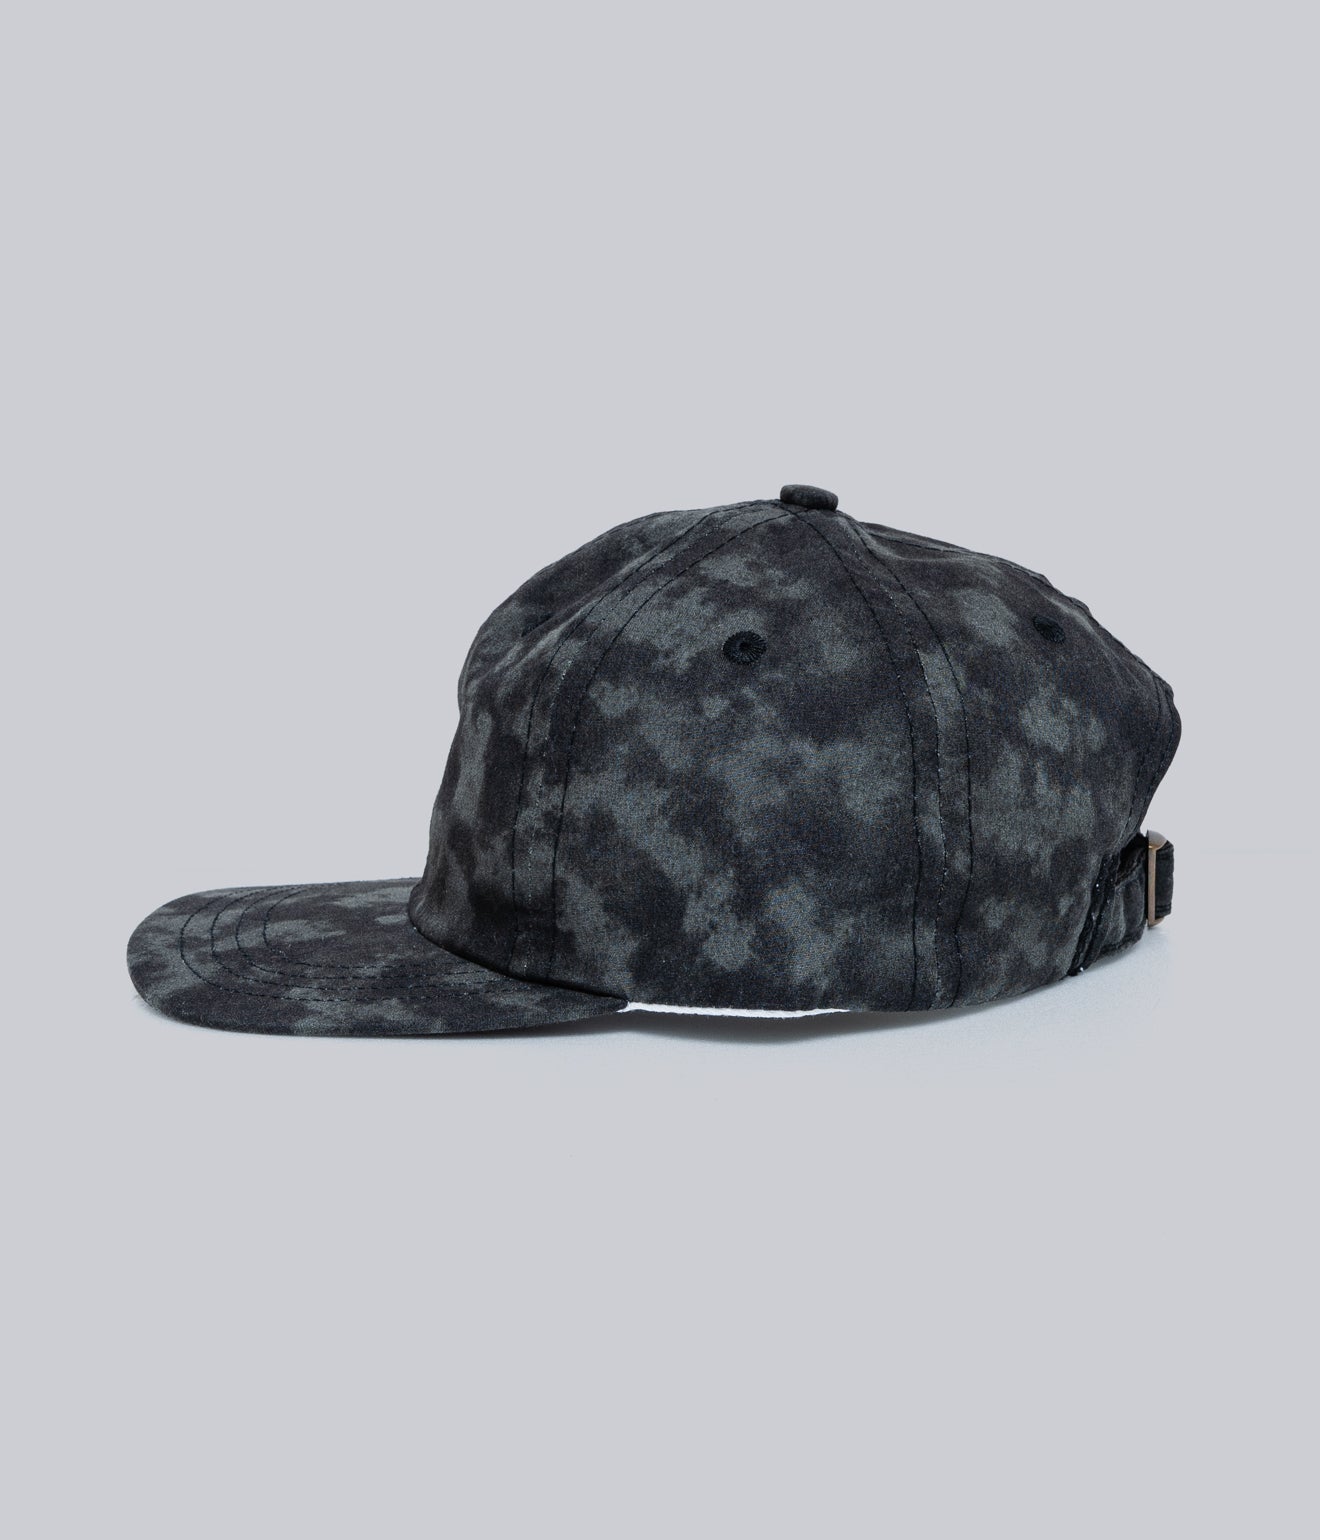 LITE YEAR "Japanese Cotton Twill 6 Panel Cap" Cloudy Washed Black - WEAREALLANIMALS